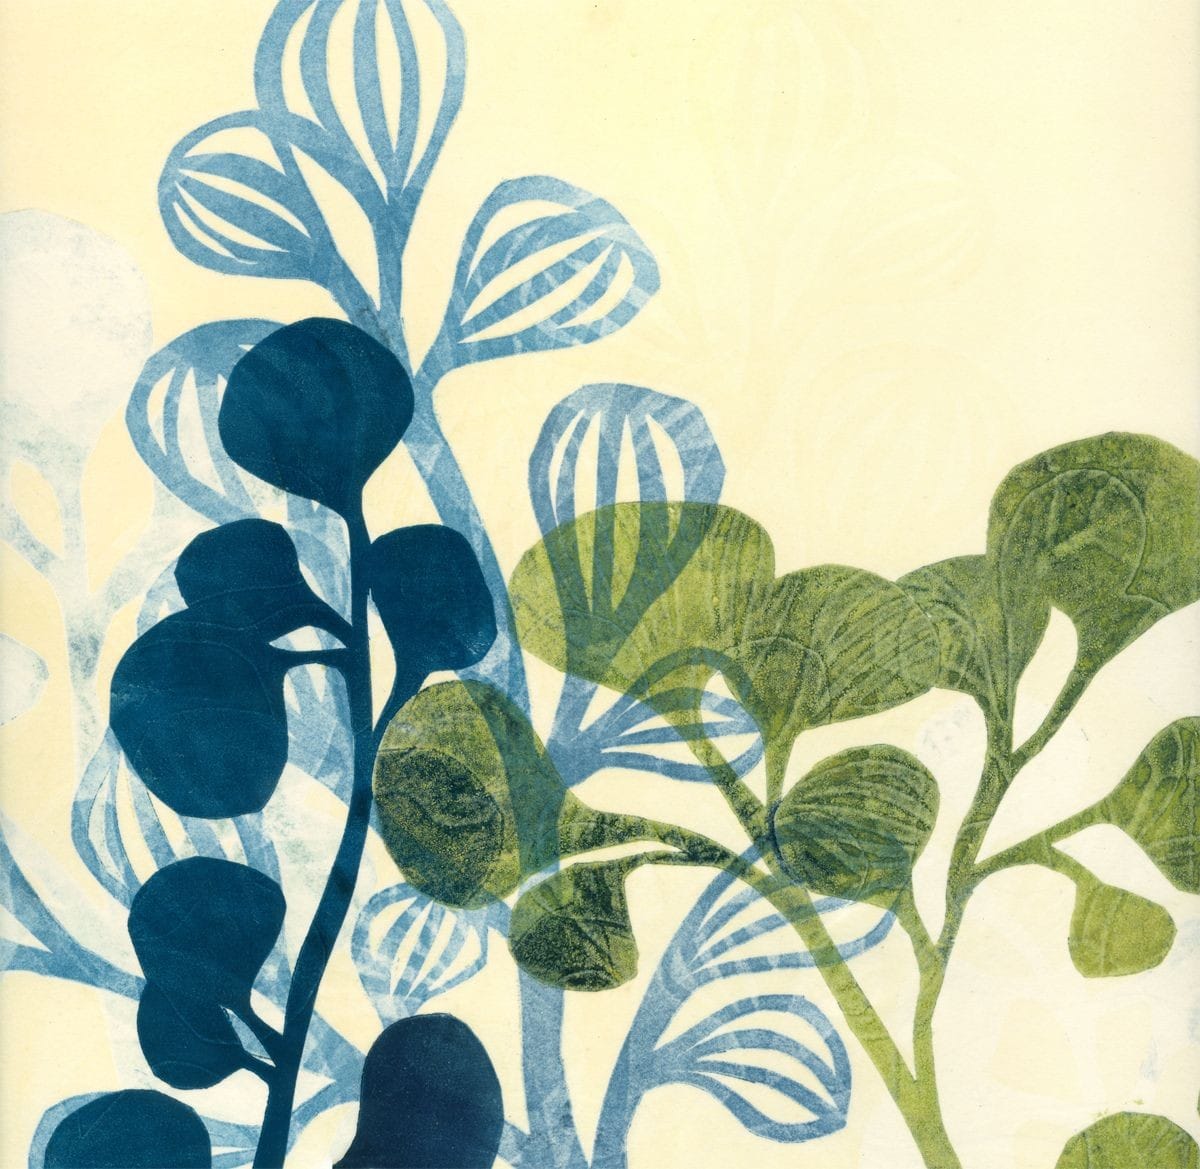 Botanical monoprint in pink and blue using drypoint and collagraph techniques